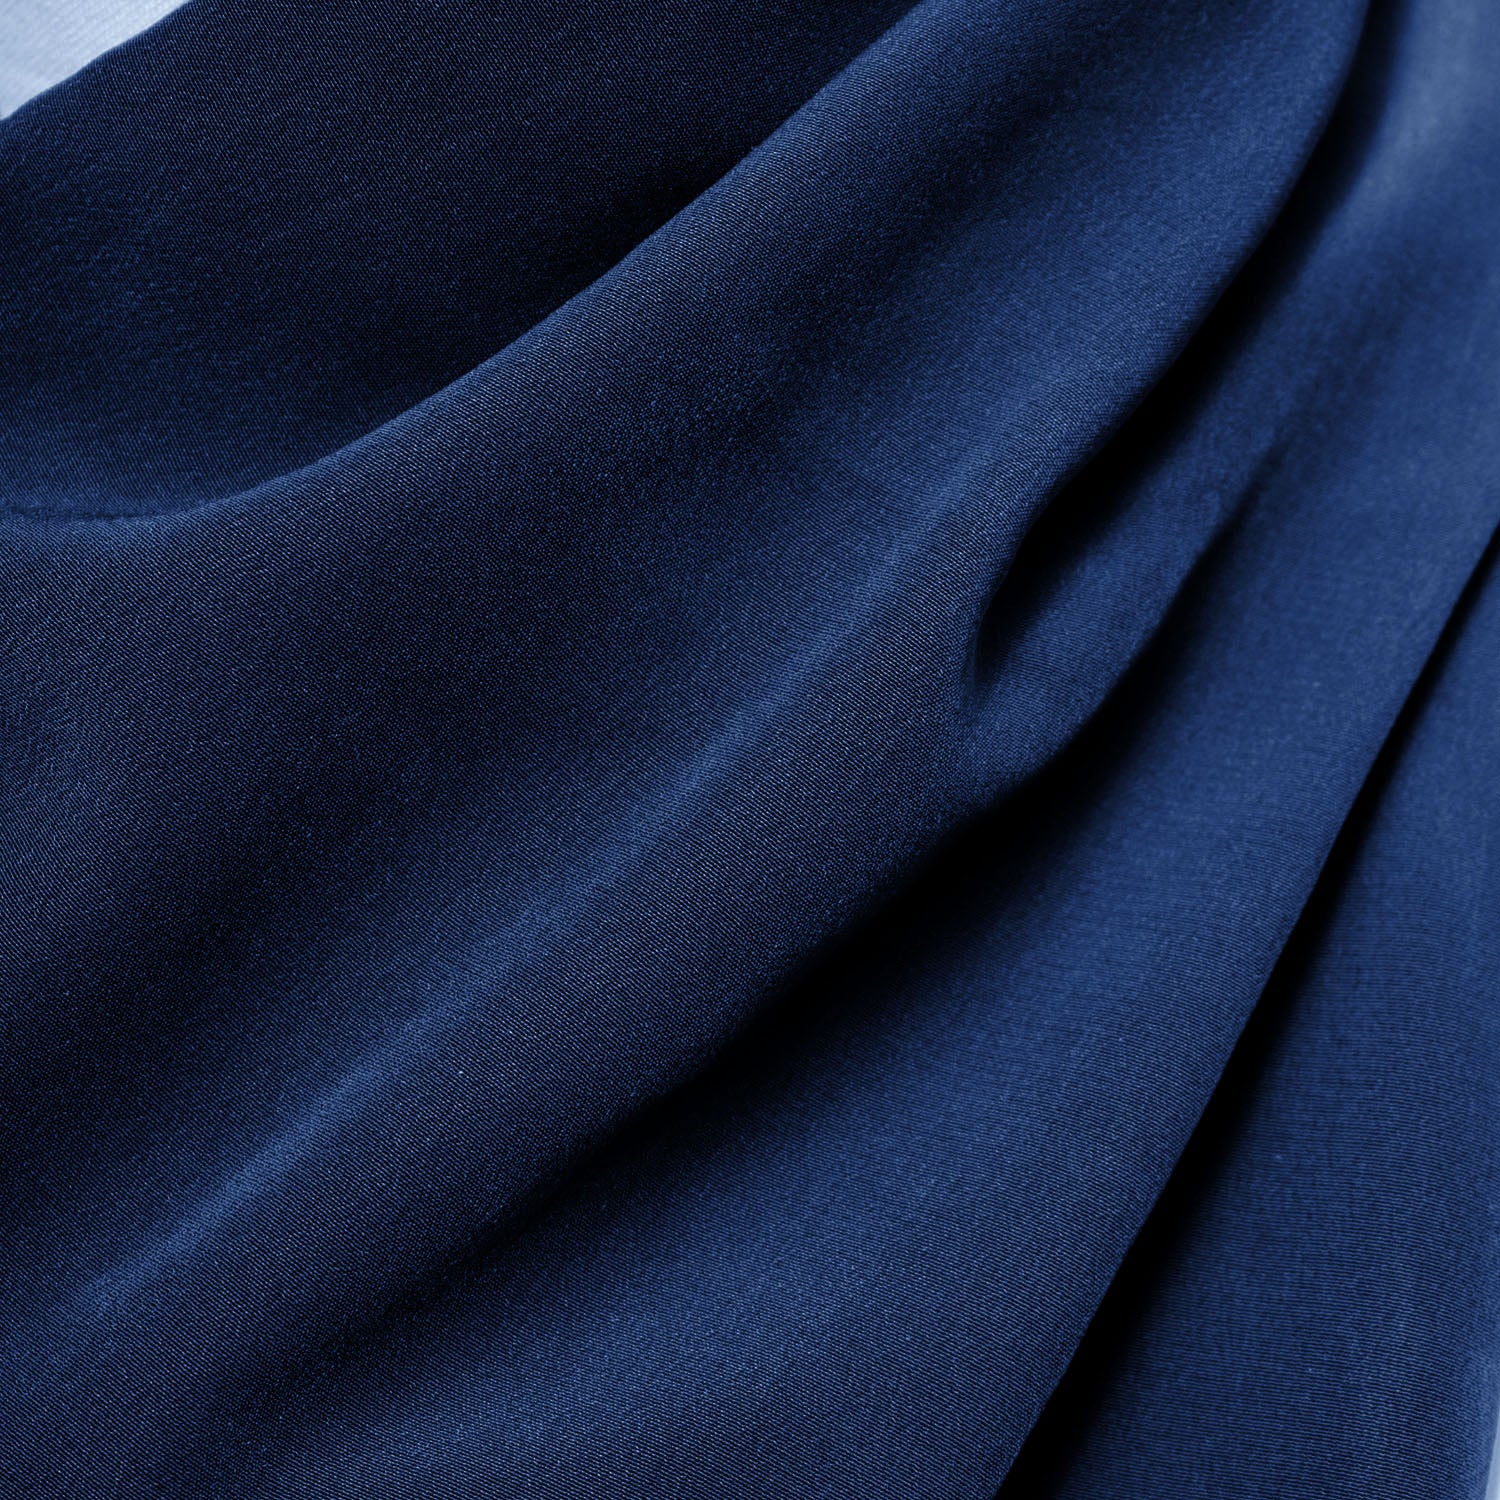 Cross Scarf Clothing Protector - Navy Blue | Health Care | Care Designs